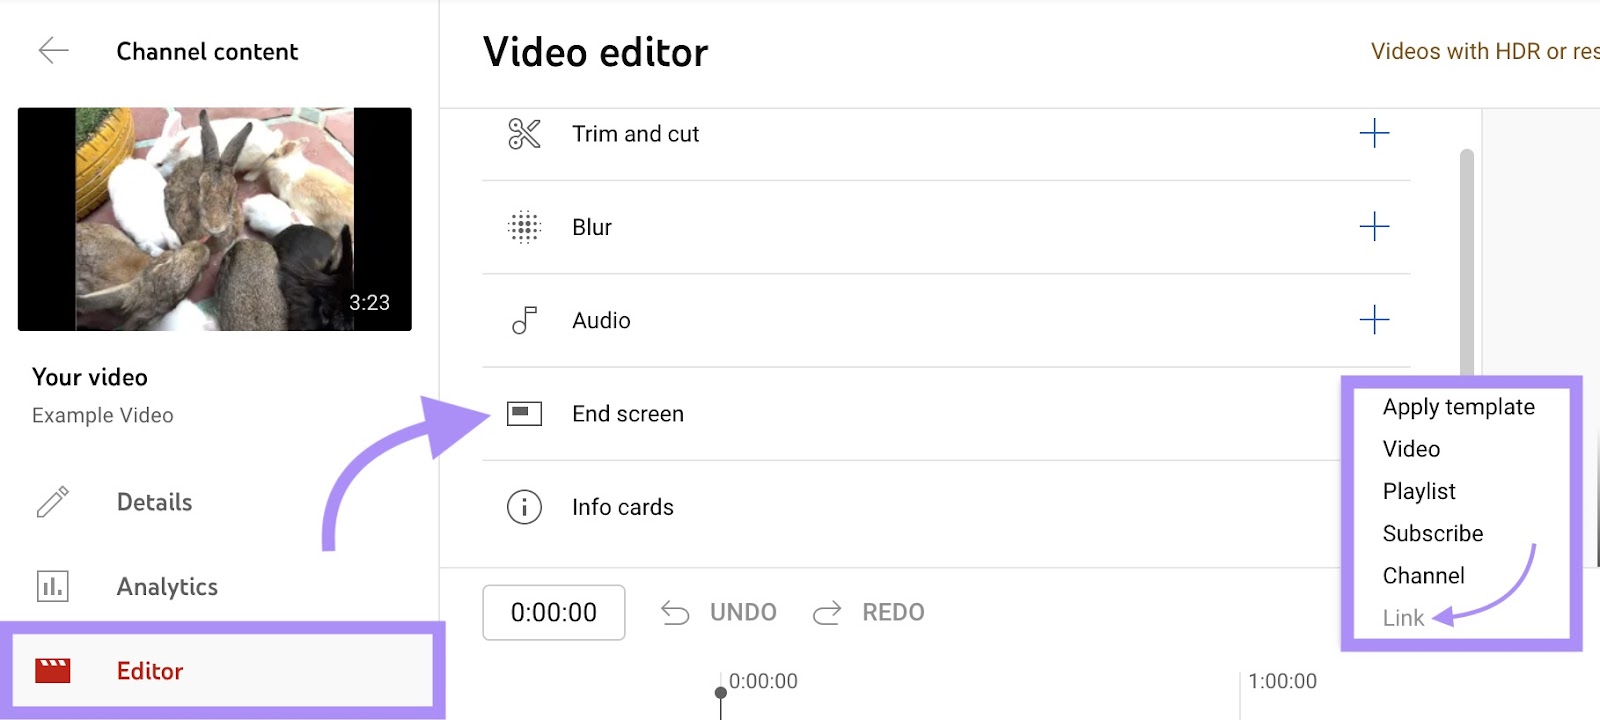 "Link" option selected next to "End screen" in YouTube Studio